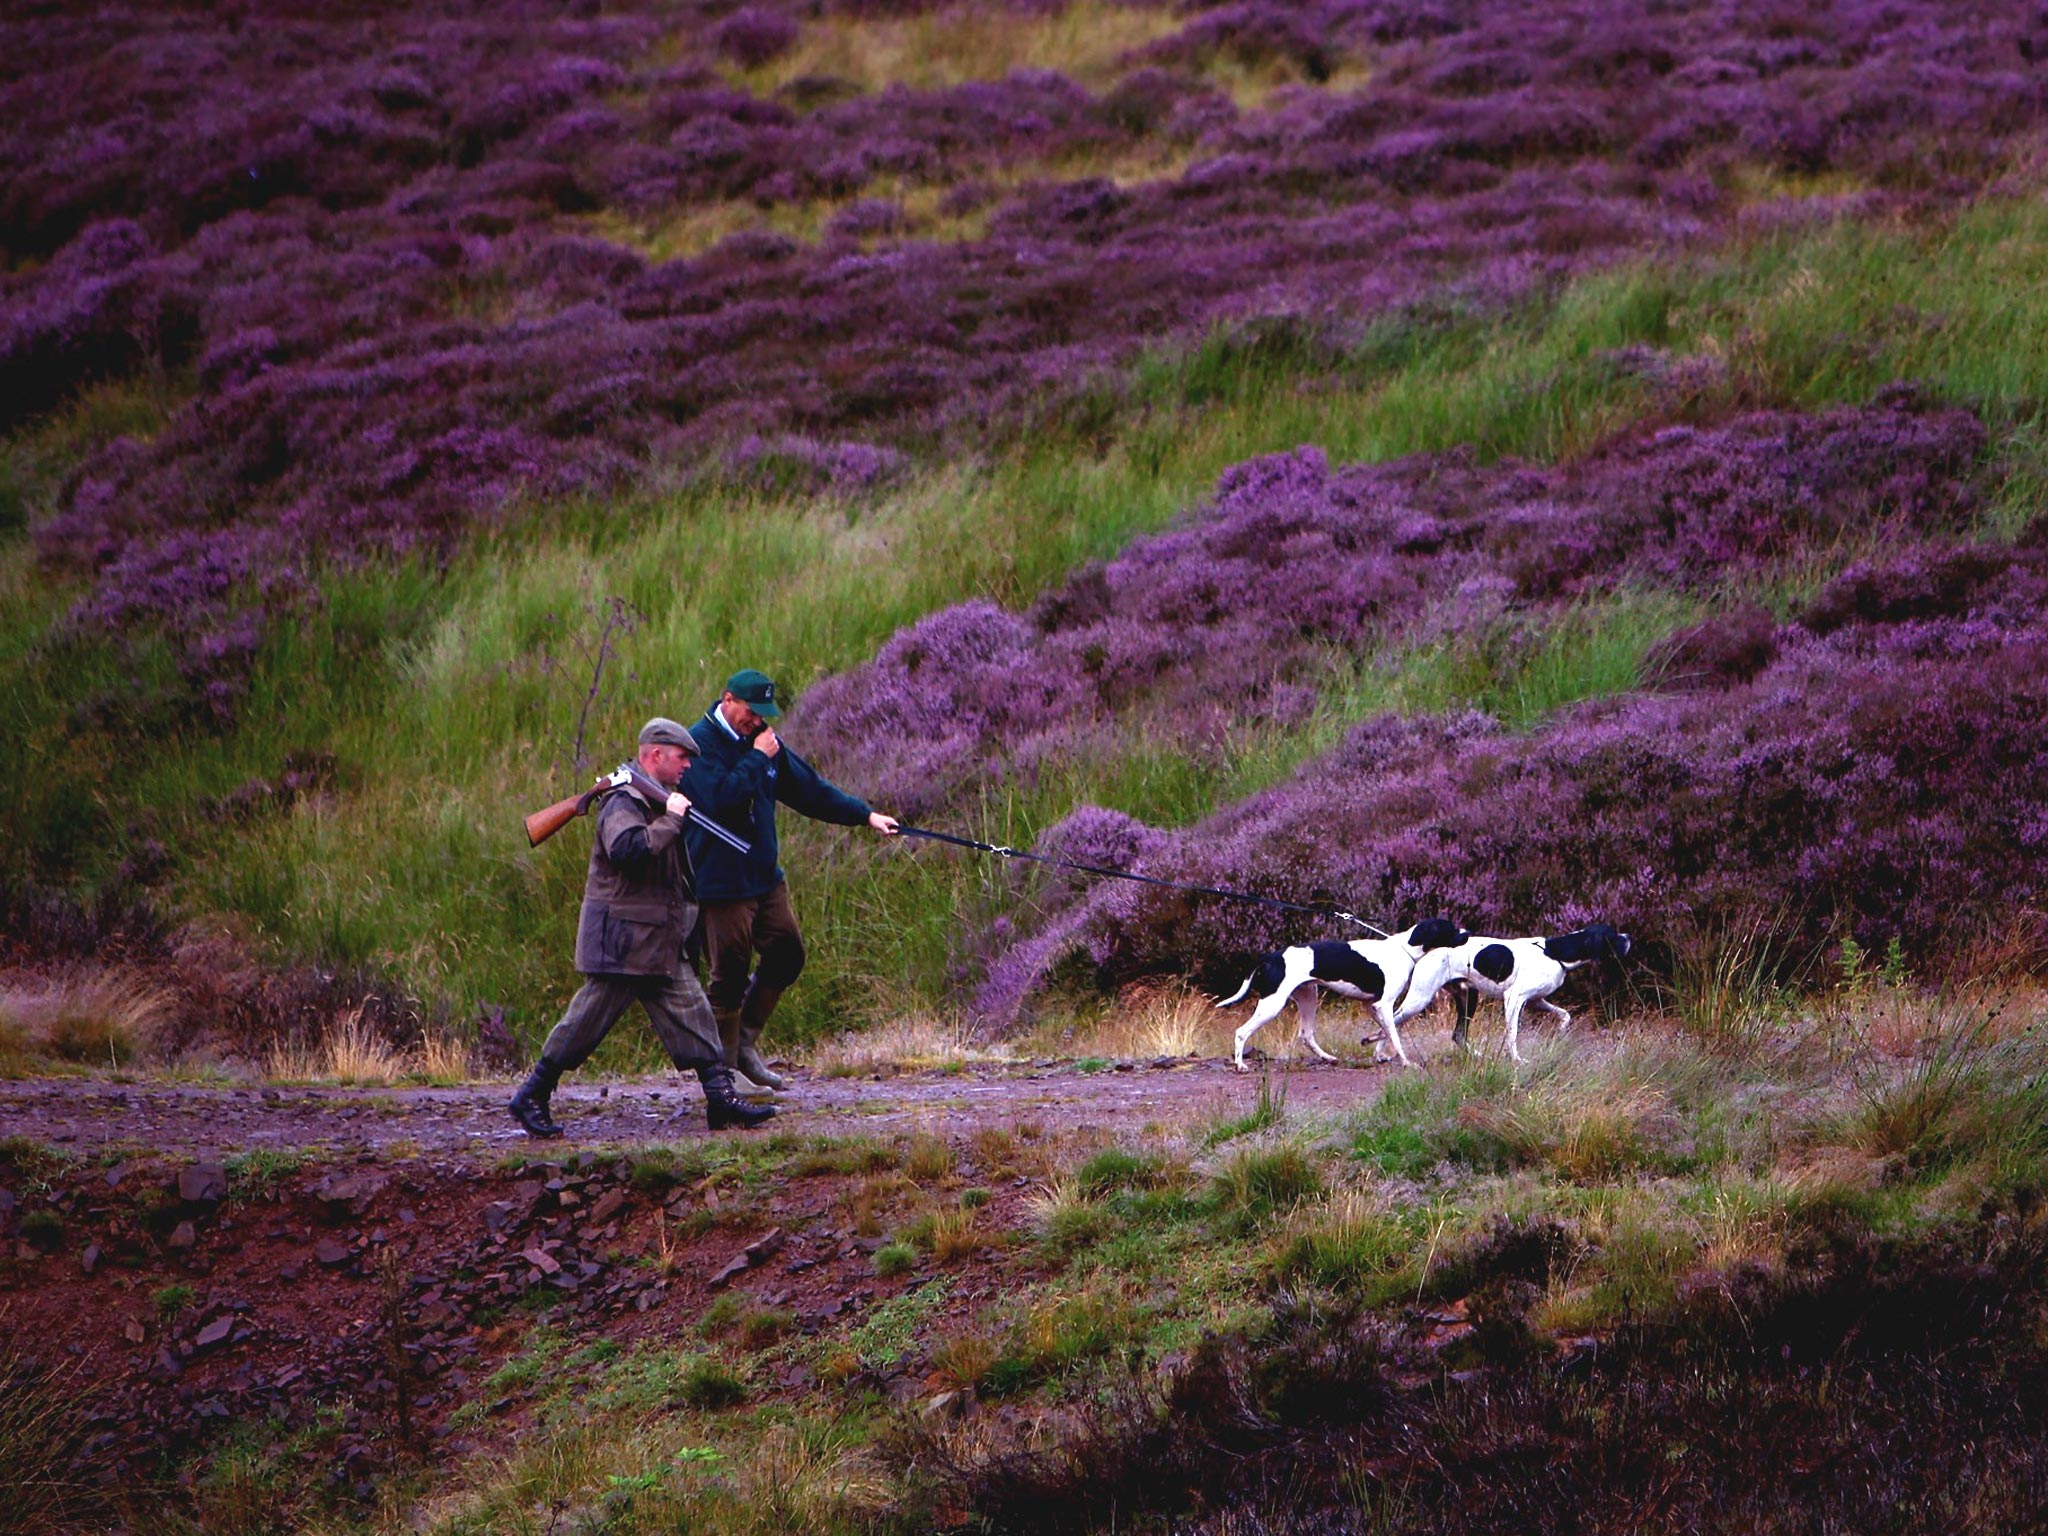 Grousekeepers in the Scottish Borders check the state of the moors before the shooting season